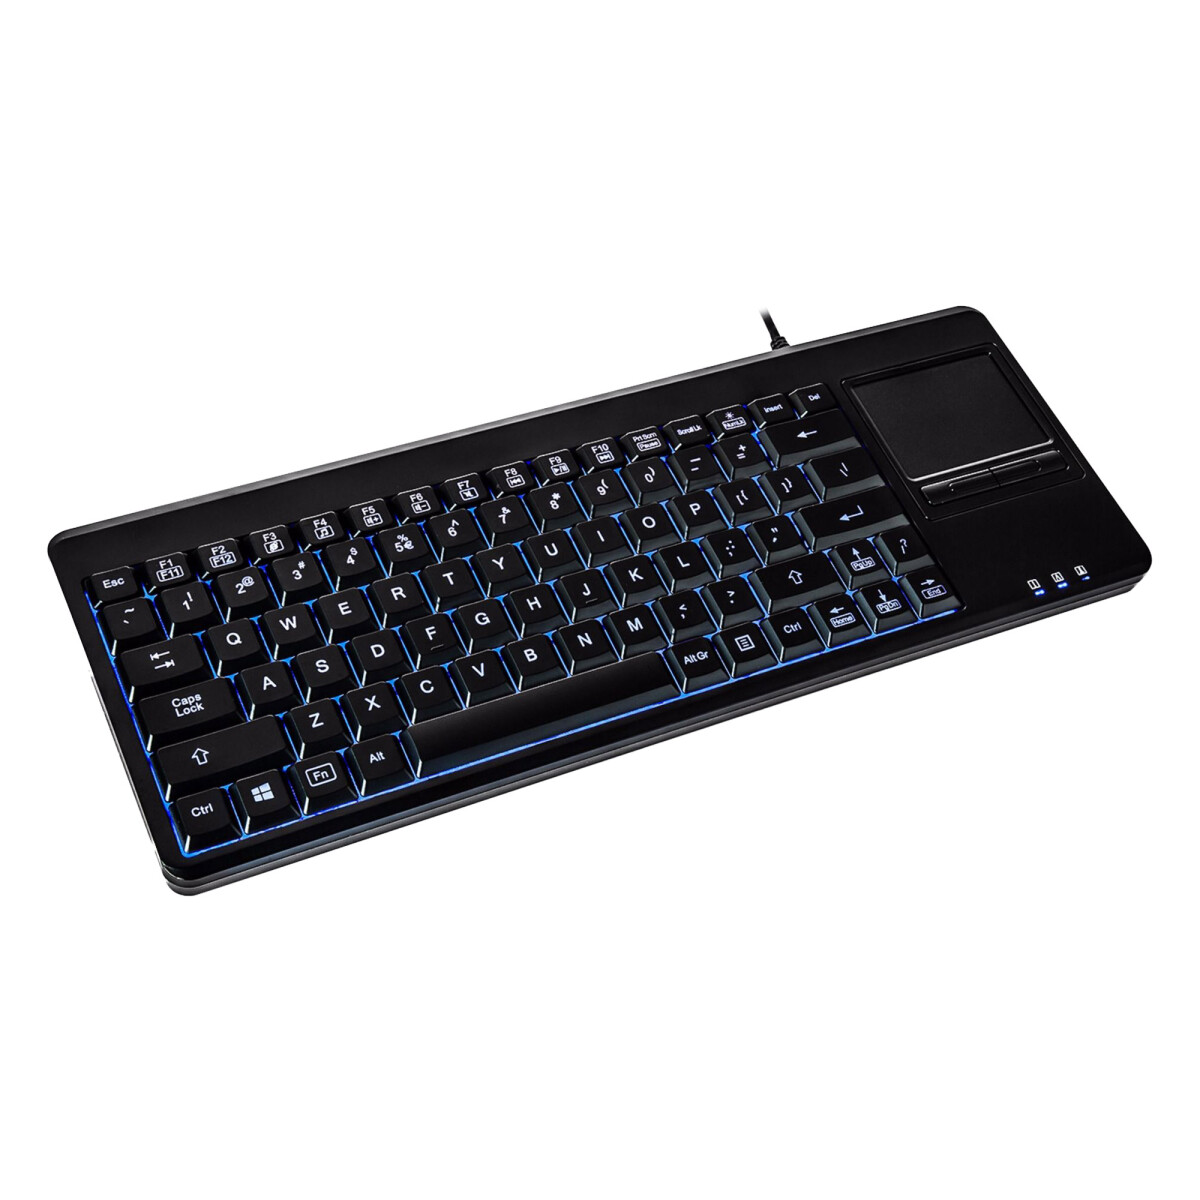 Perixx PERIBOARD-315, US Layout, backlit keyboard with...